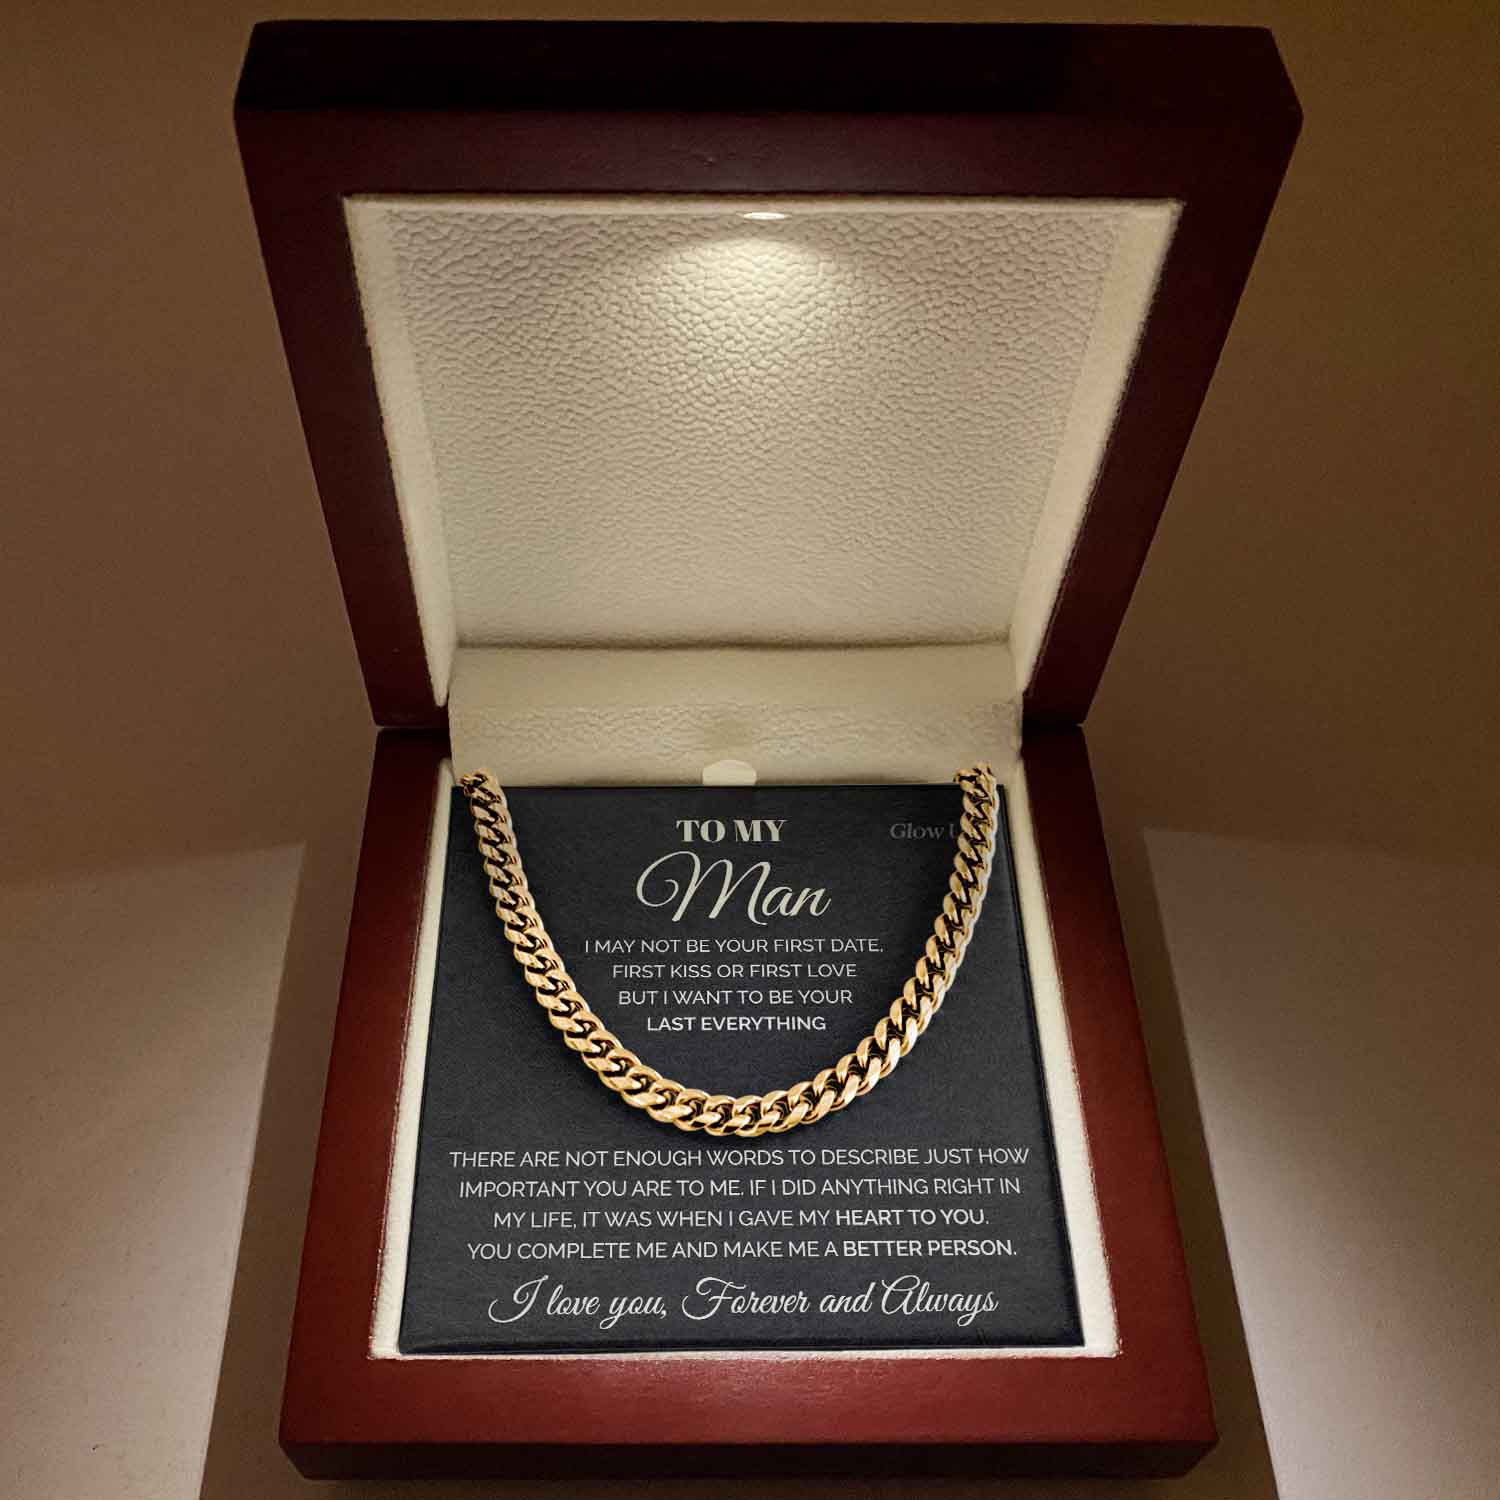 Glow Up Cuban Link Chain 18k Gold Over Stainless Steel / Luxury LED Box To my Man - Cuban Link Chain - I may not be your First date